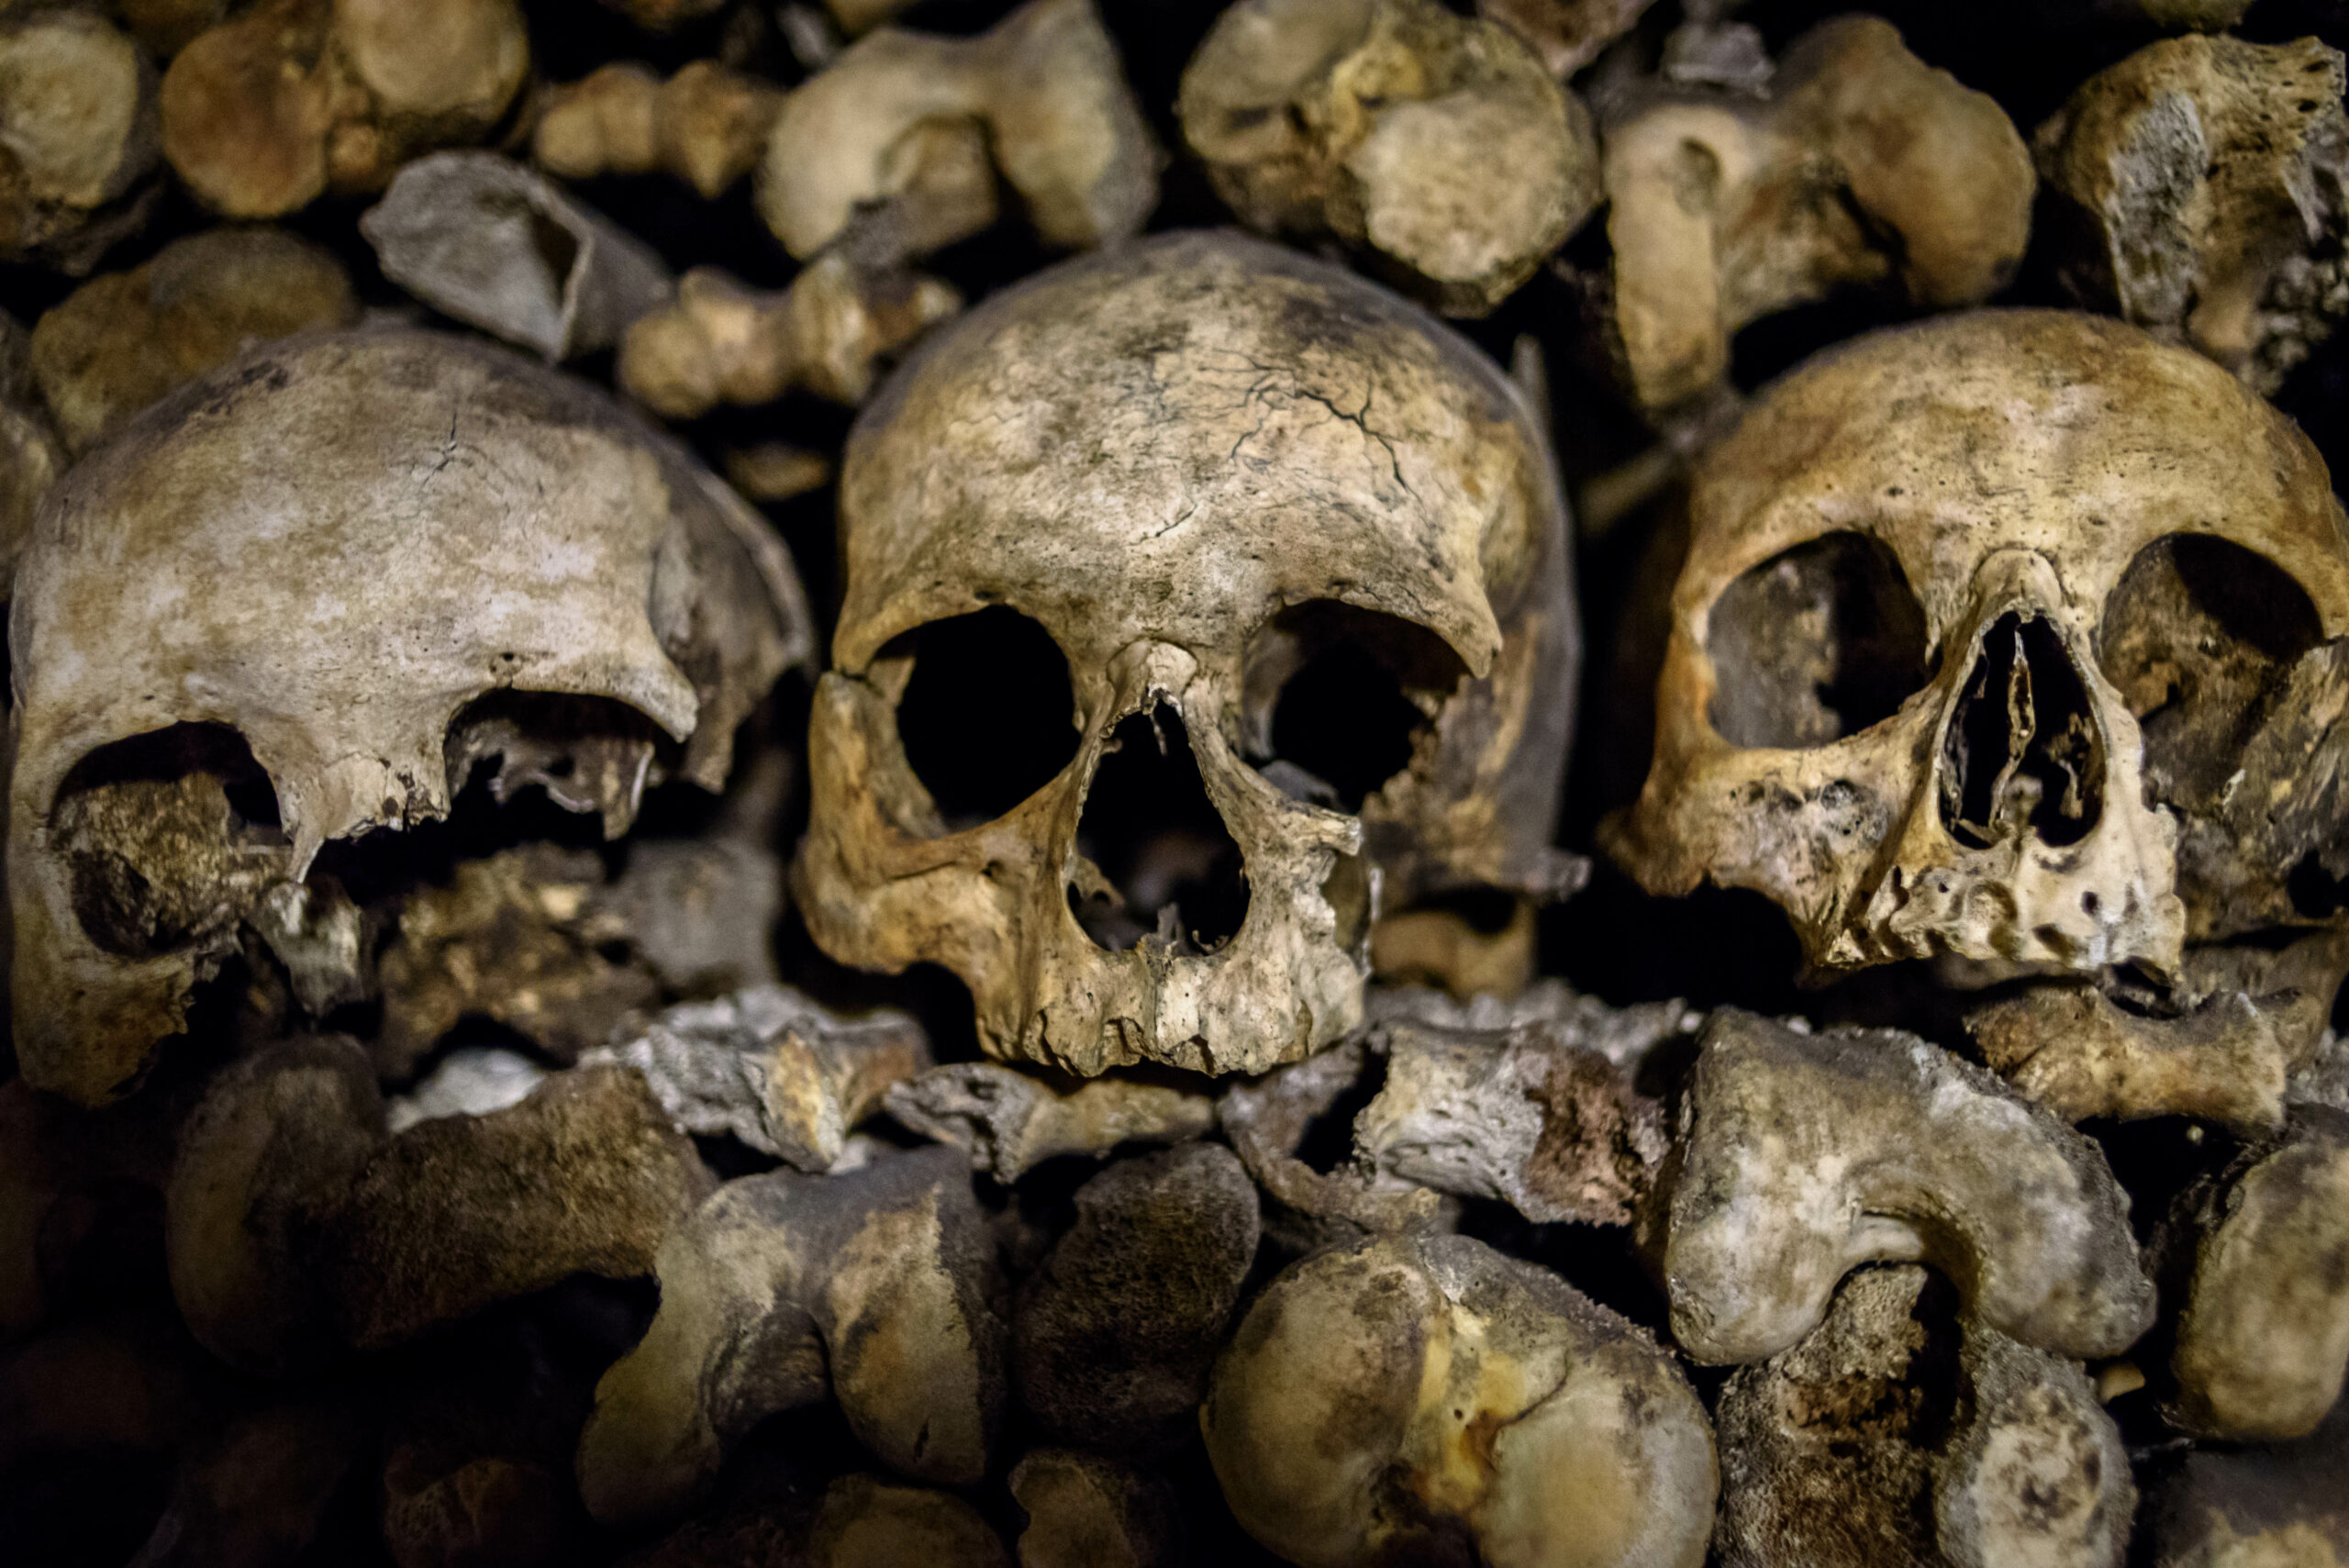 The human bone trade is legal—and booming on Instagram